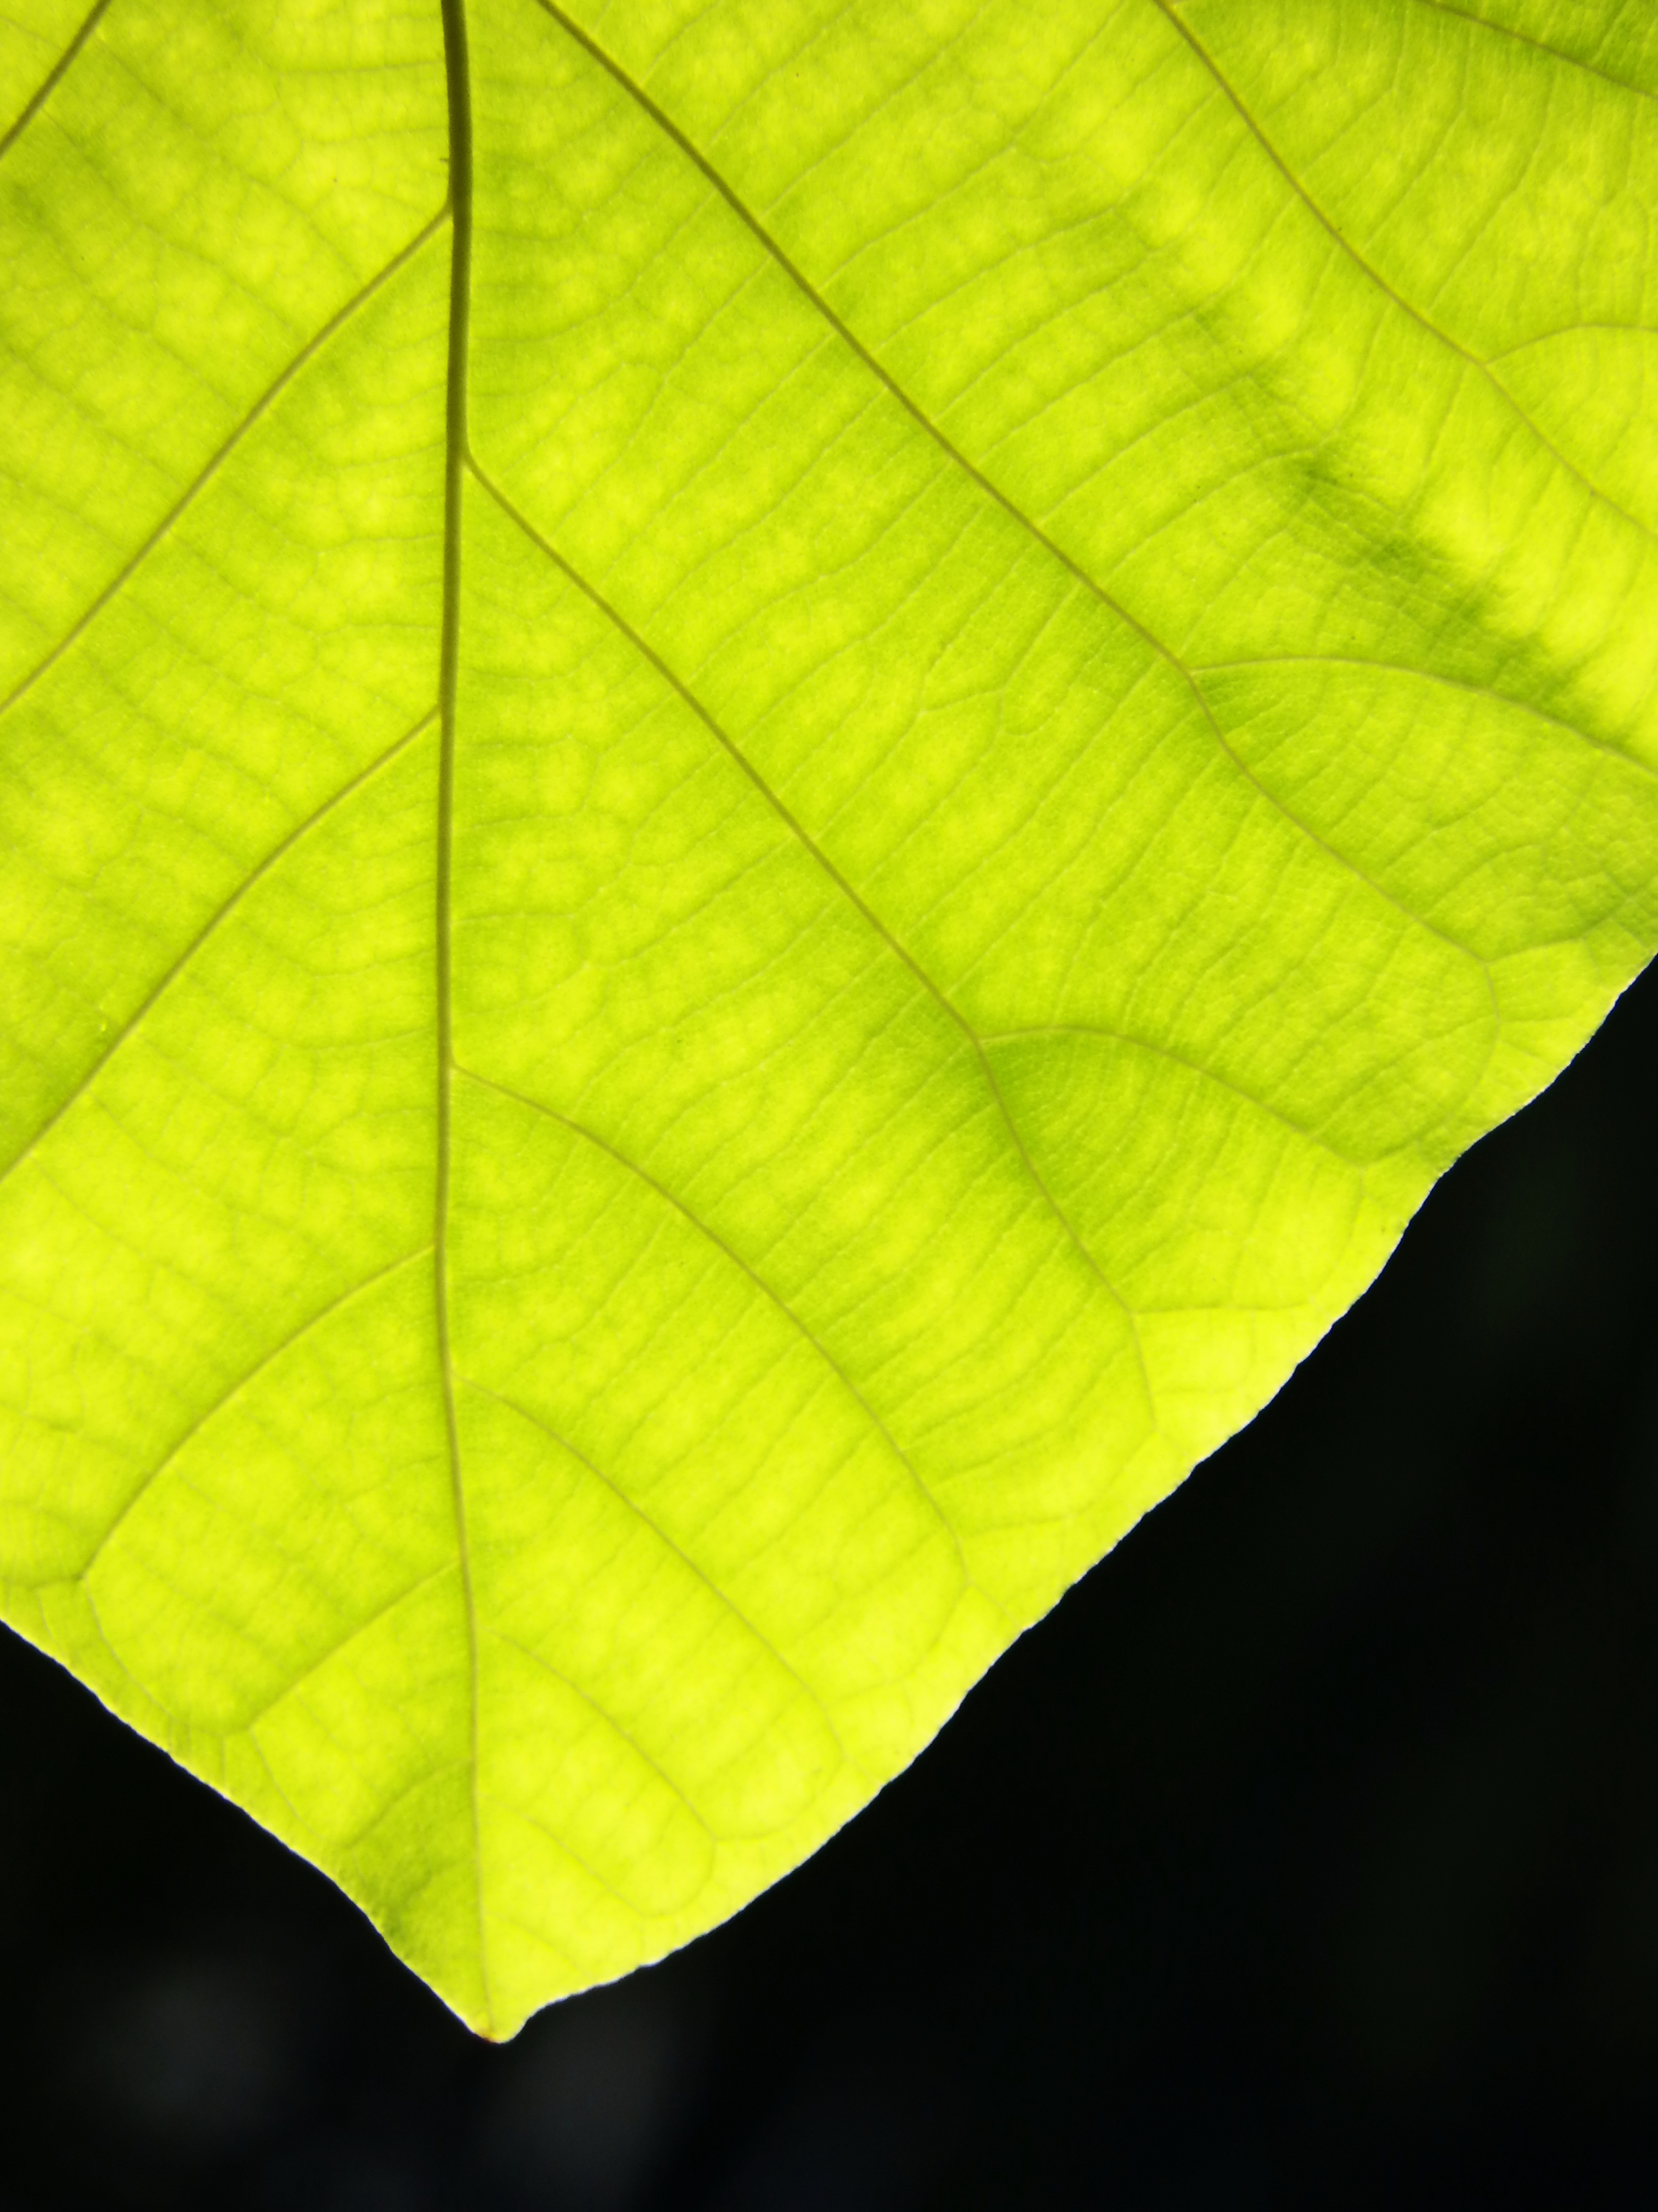 Texture of a green leaf as background, Abstract, Rich, Natural, Nature, HQ Photo